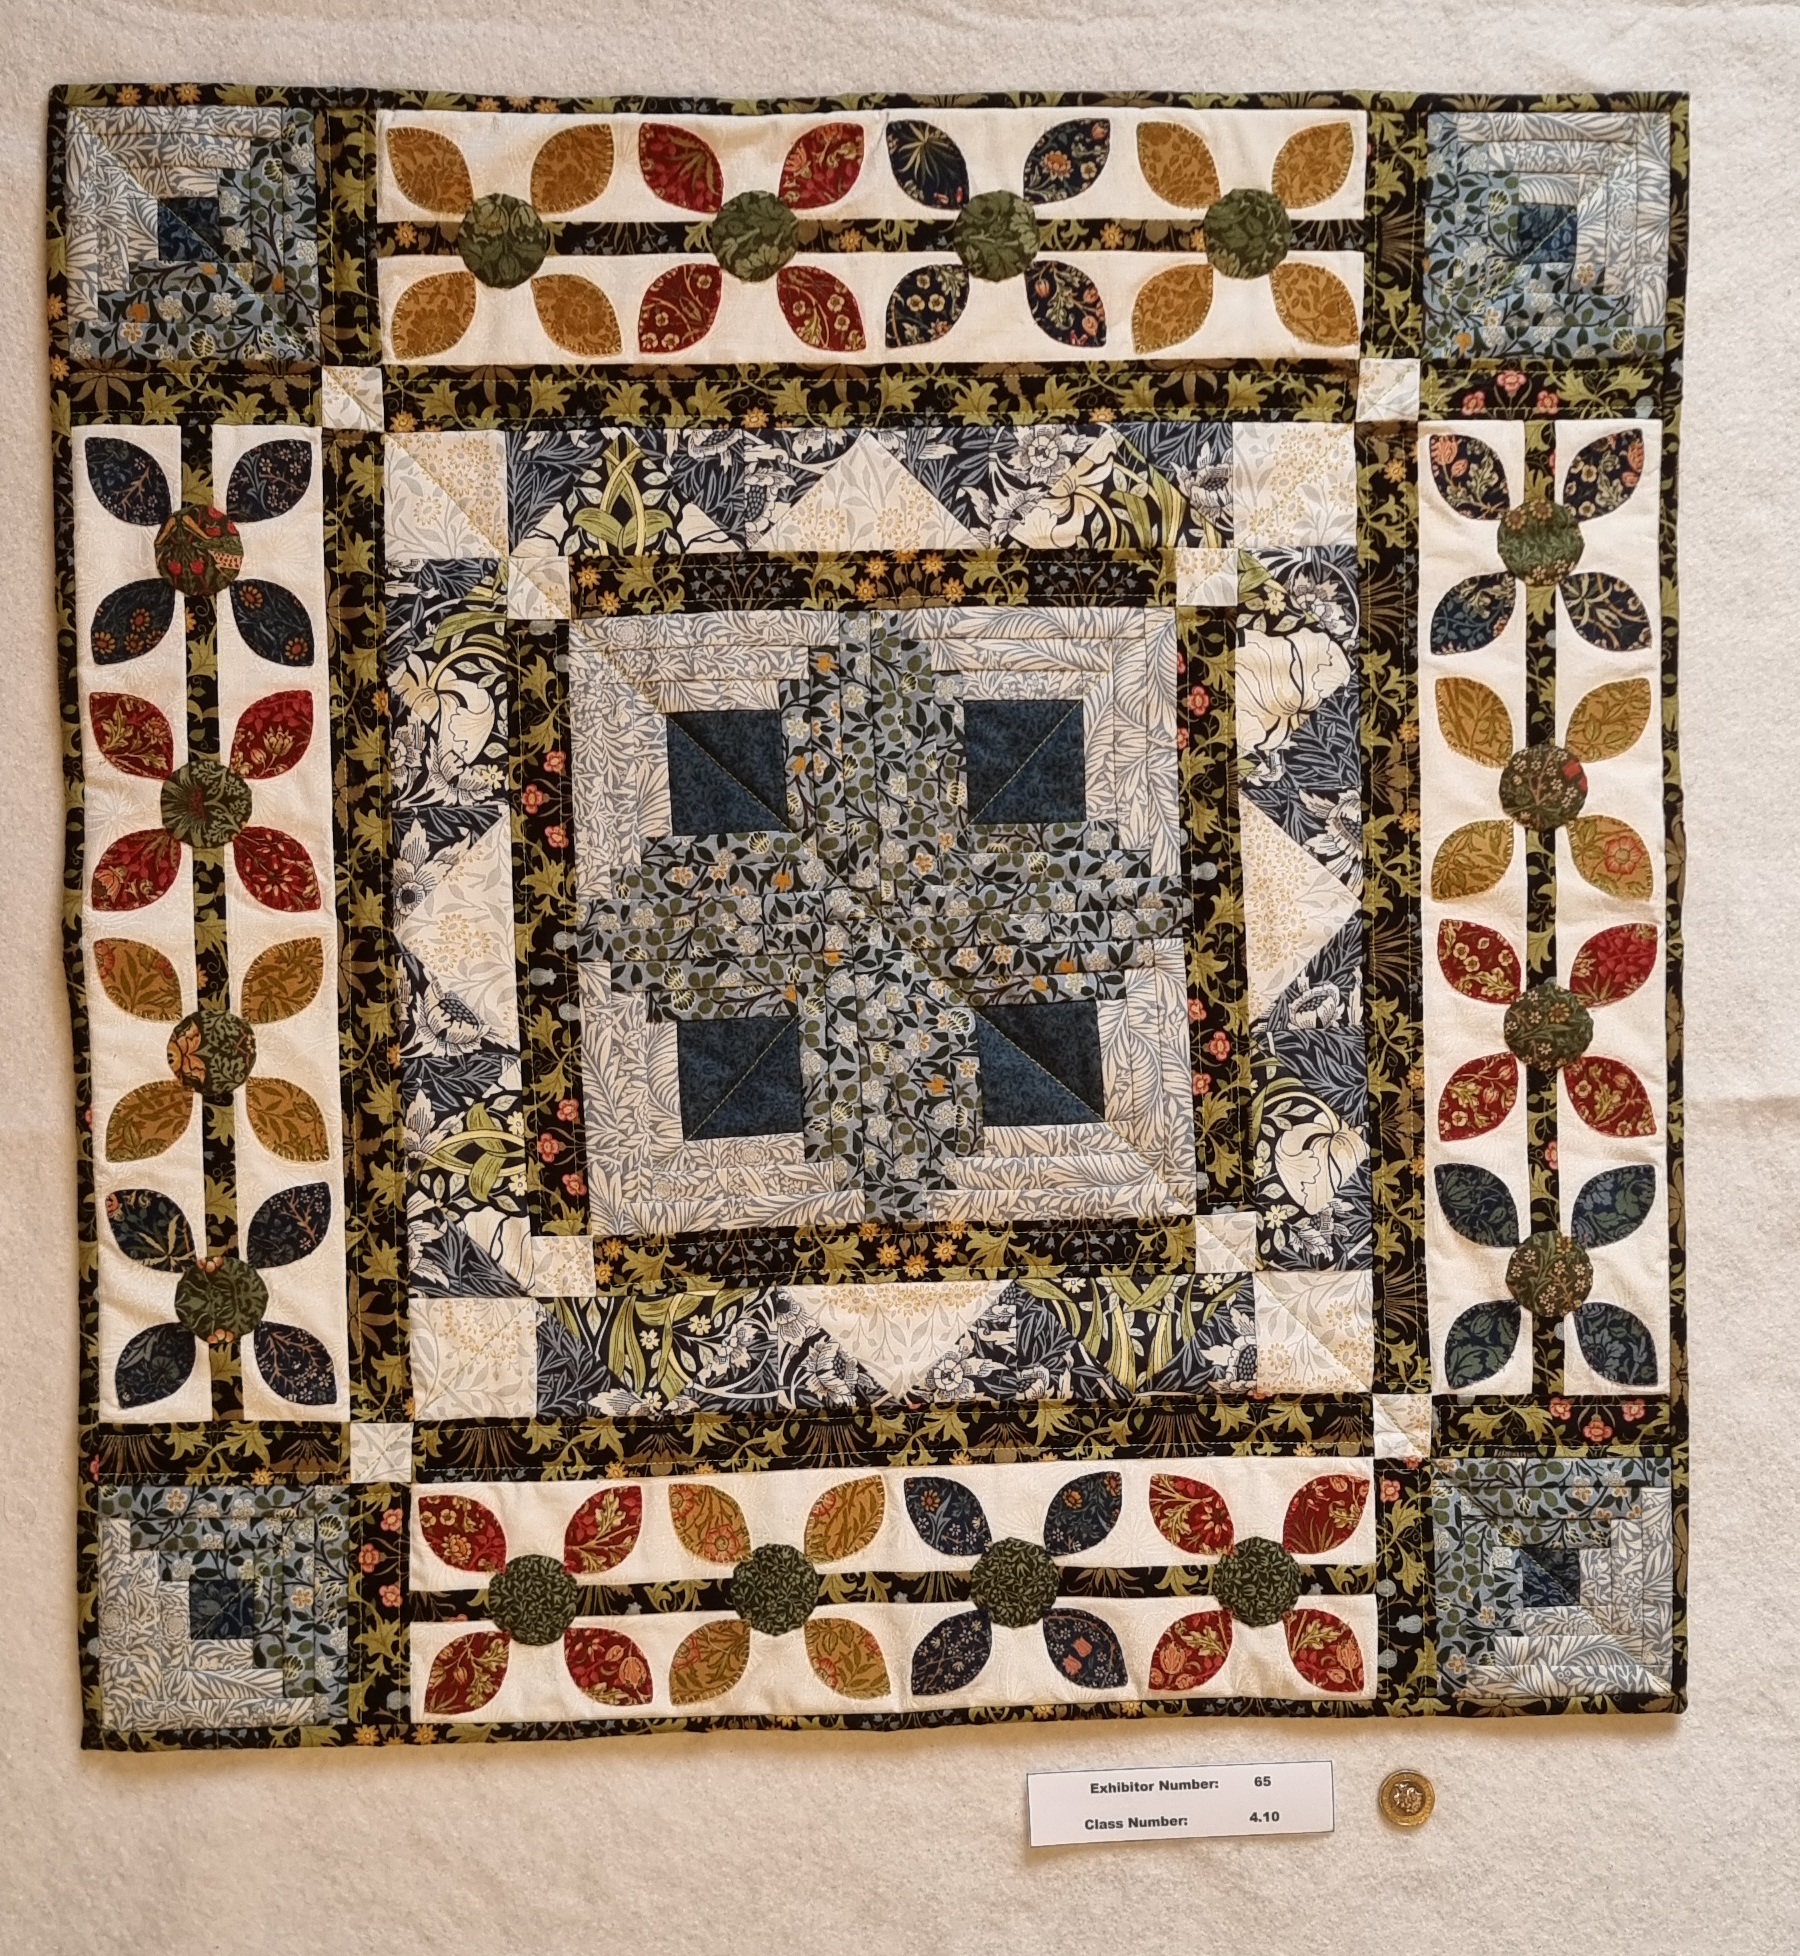 Best in Section Rosette: Awarded to C Fair for her entry in Class 4.10: A Patchwork item